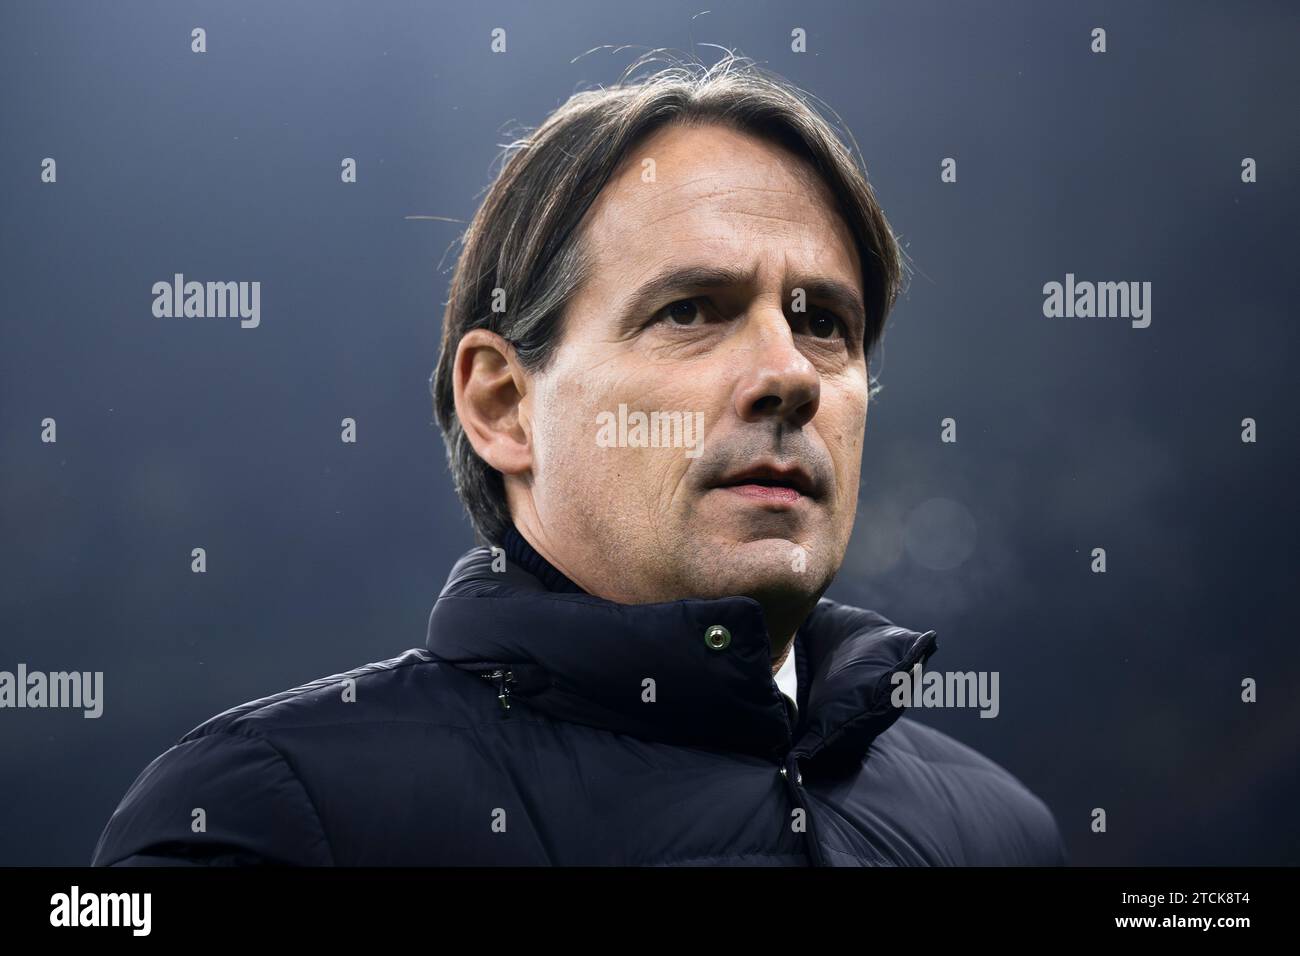 Milan, Italy. 12 December 2023. Simone Inzaghi, head coach of FC Internazionale, looks on prior to the UEFA Champions League football match between FC Internazionale and Real Sociedad. Credit: Nicolò Campo/Alamy Live News Stock Photo